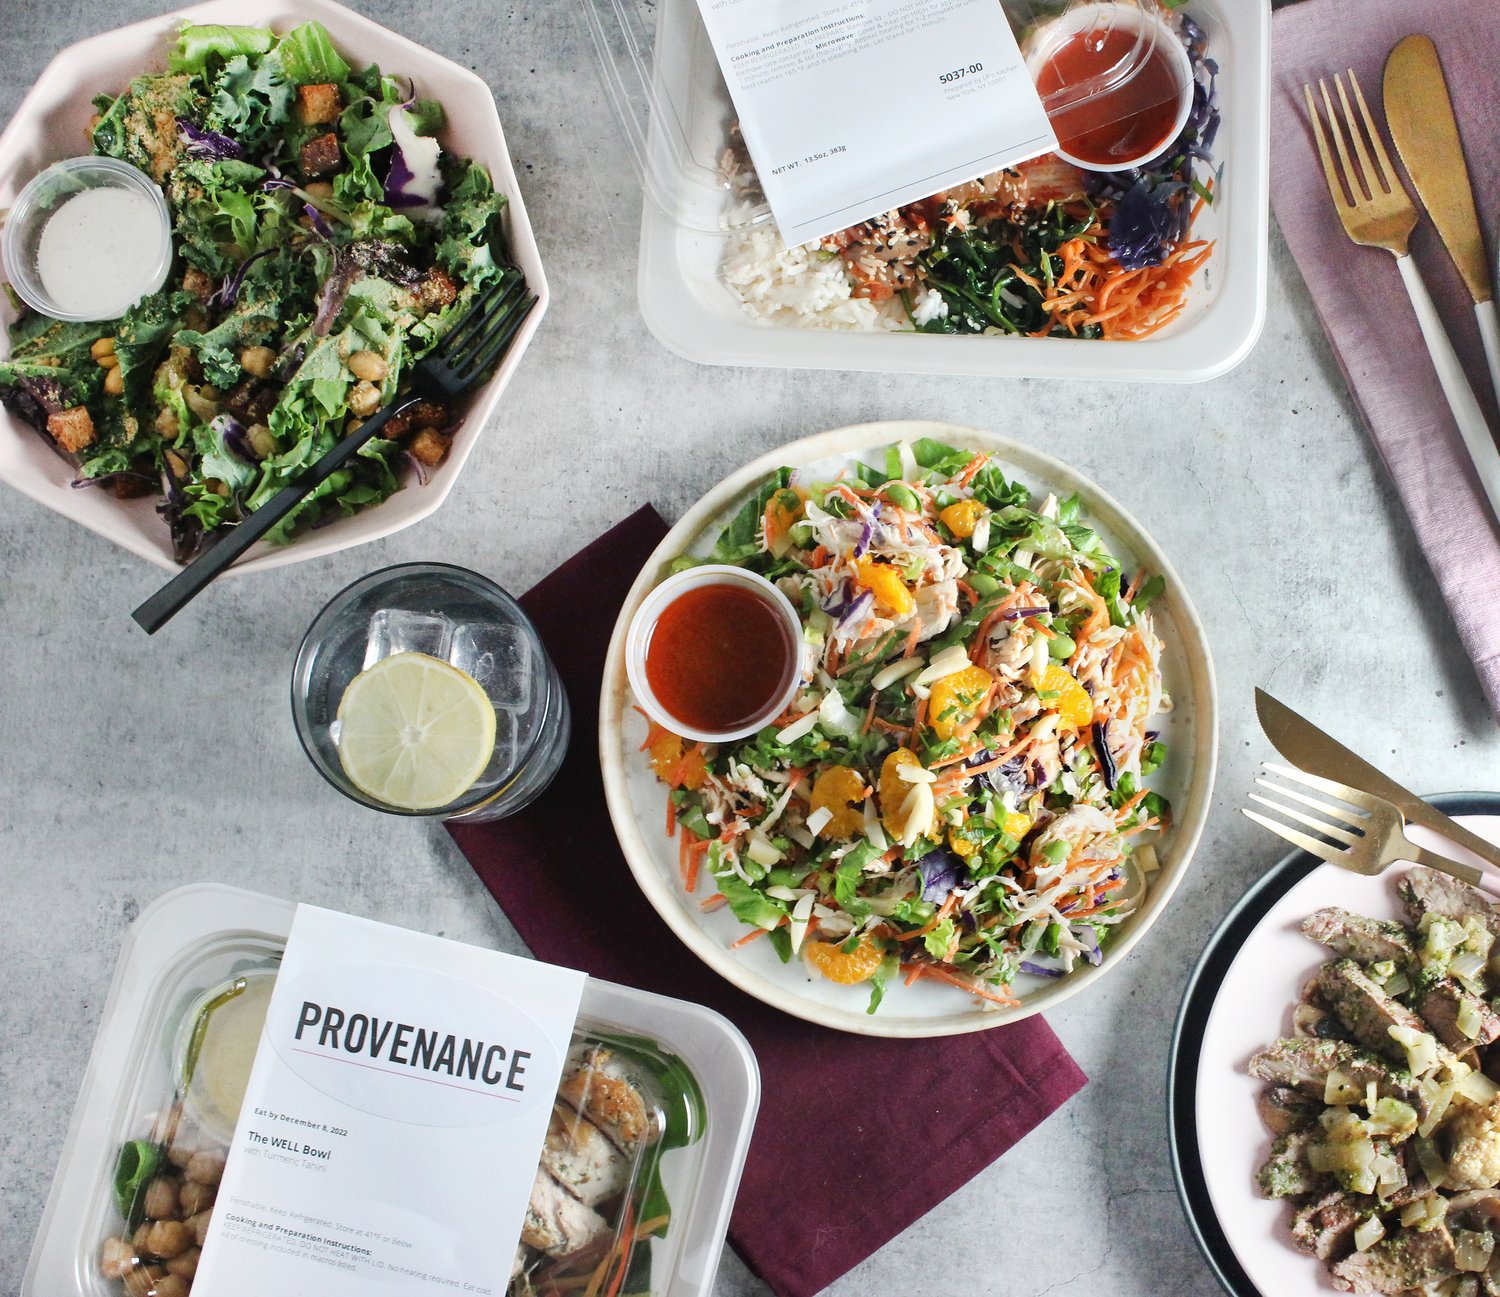 Healthy Prepared Meal Delivery Service - Provenance Meals